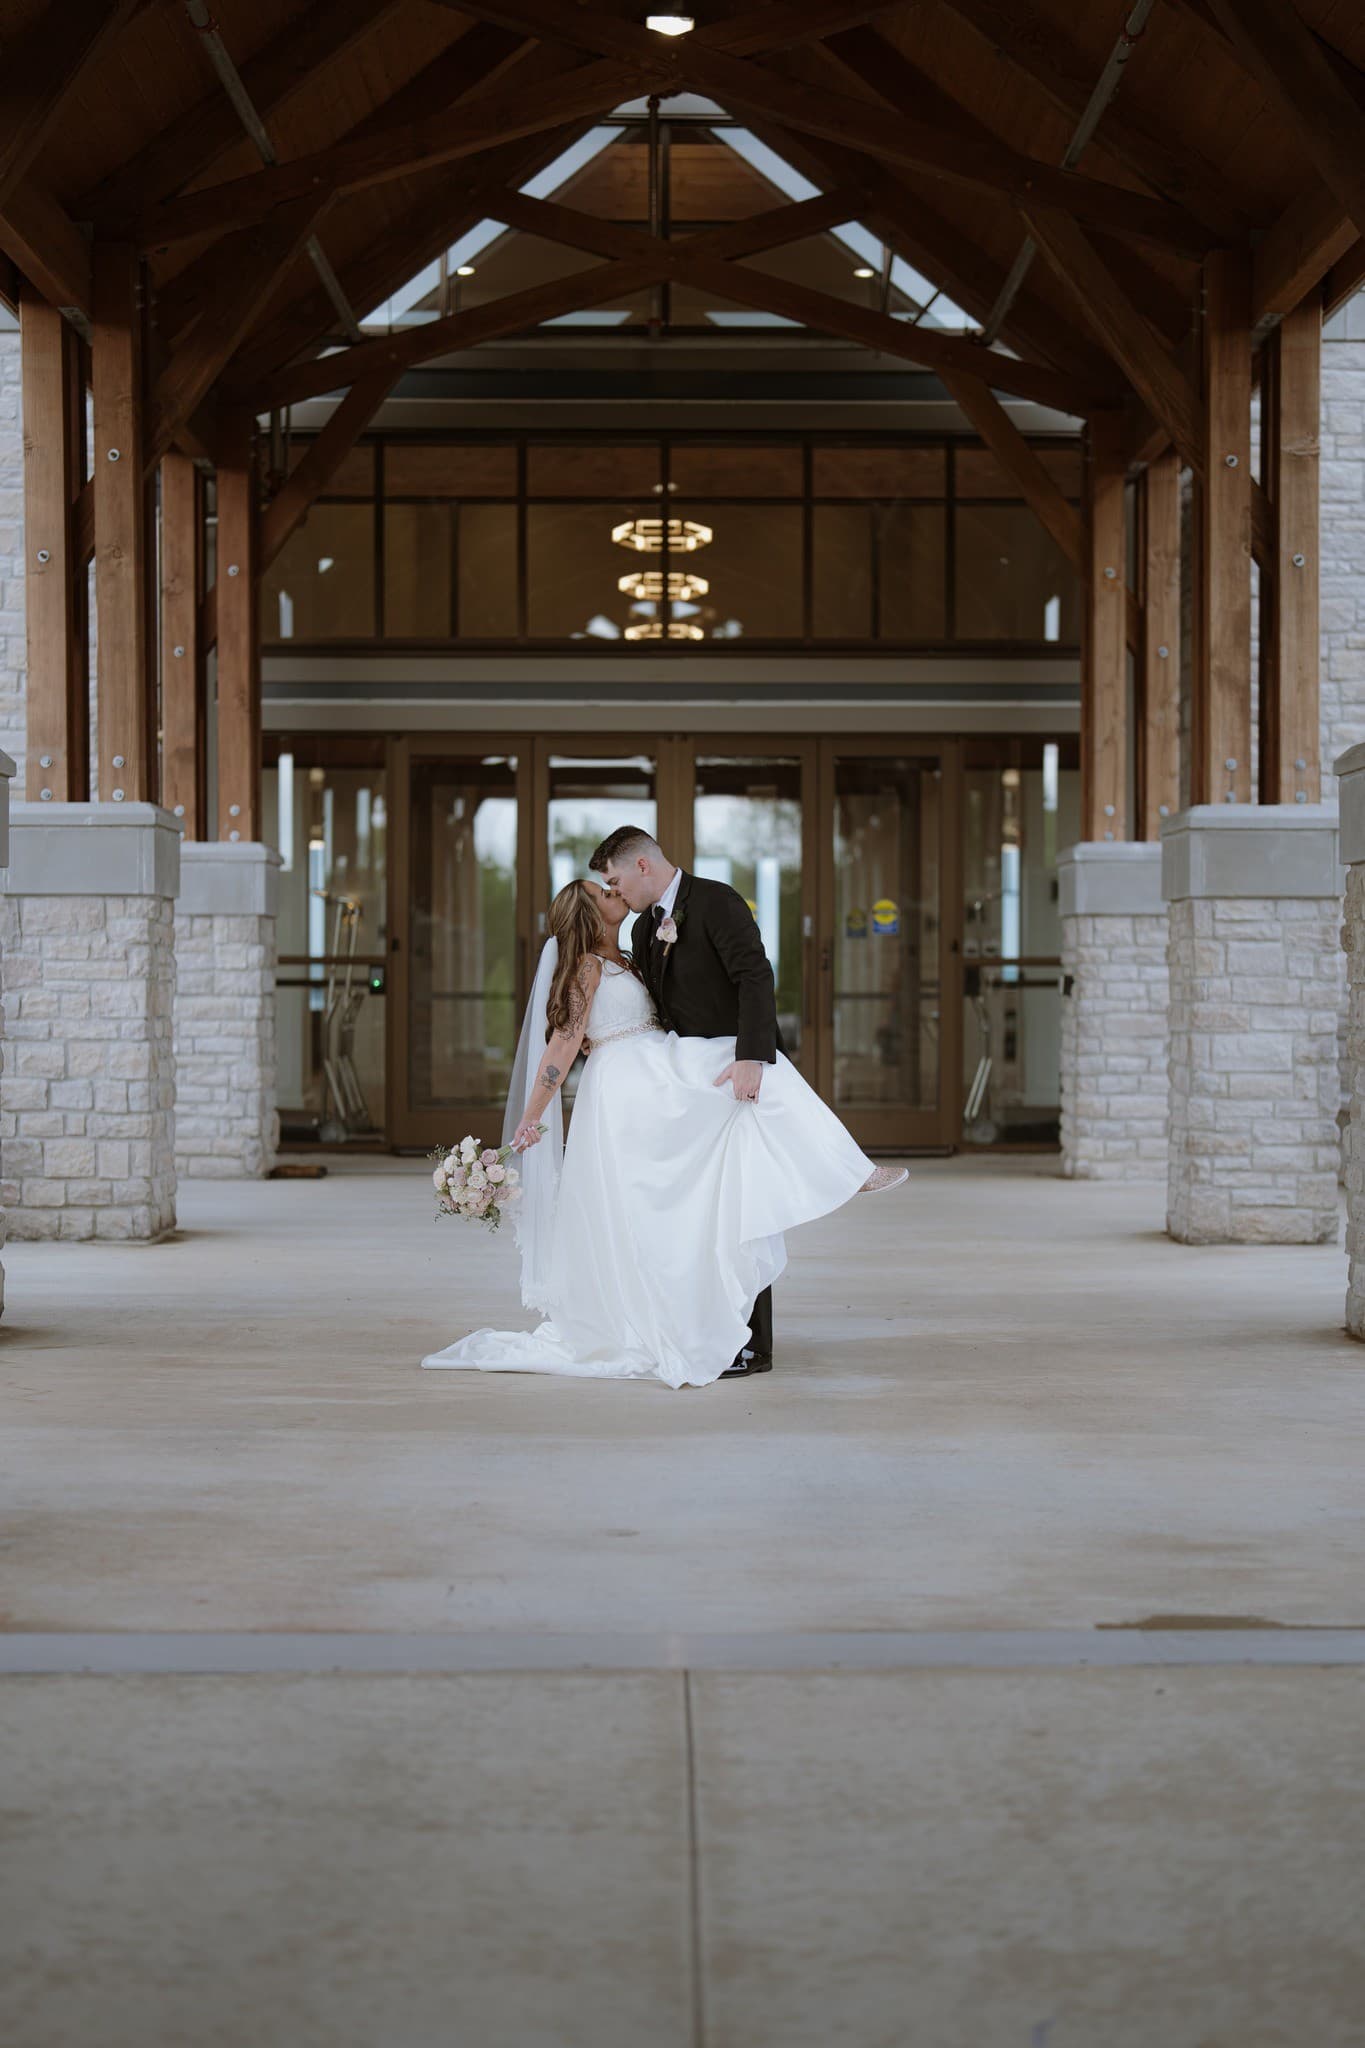 An Unforgettable Day at The Lodge at Paris Landing: Carly & Austin's Wedding